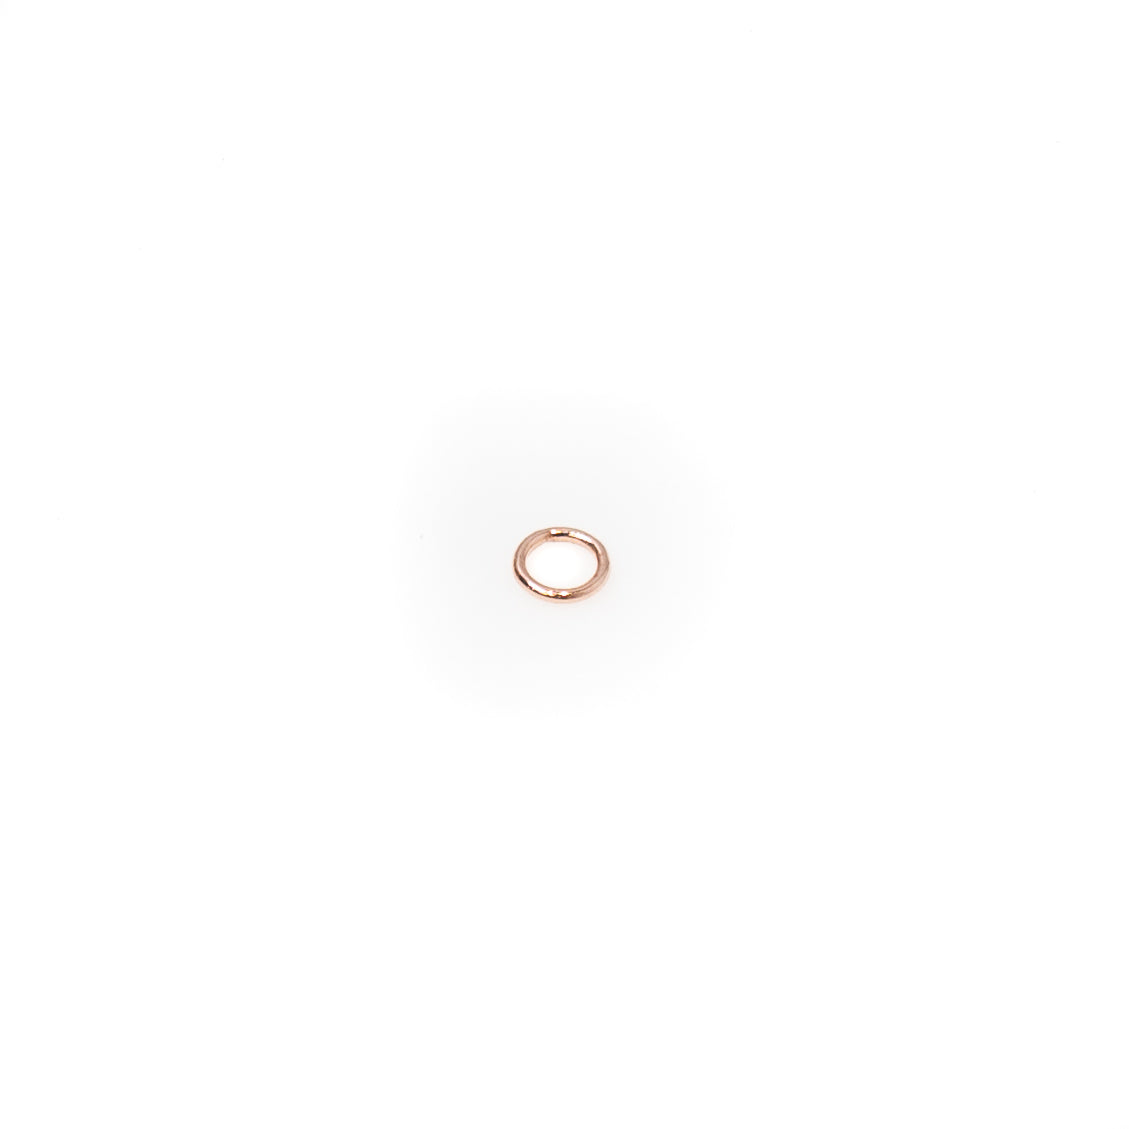 5mm Soldered Closed Jump Ring (4 Metal Options Available)